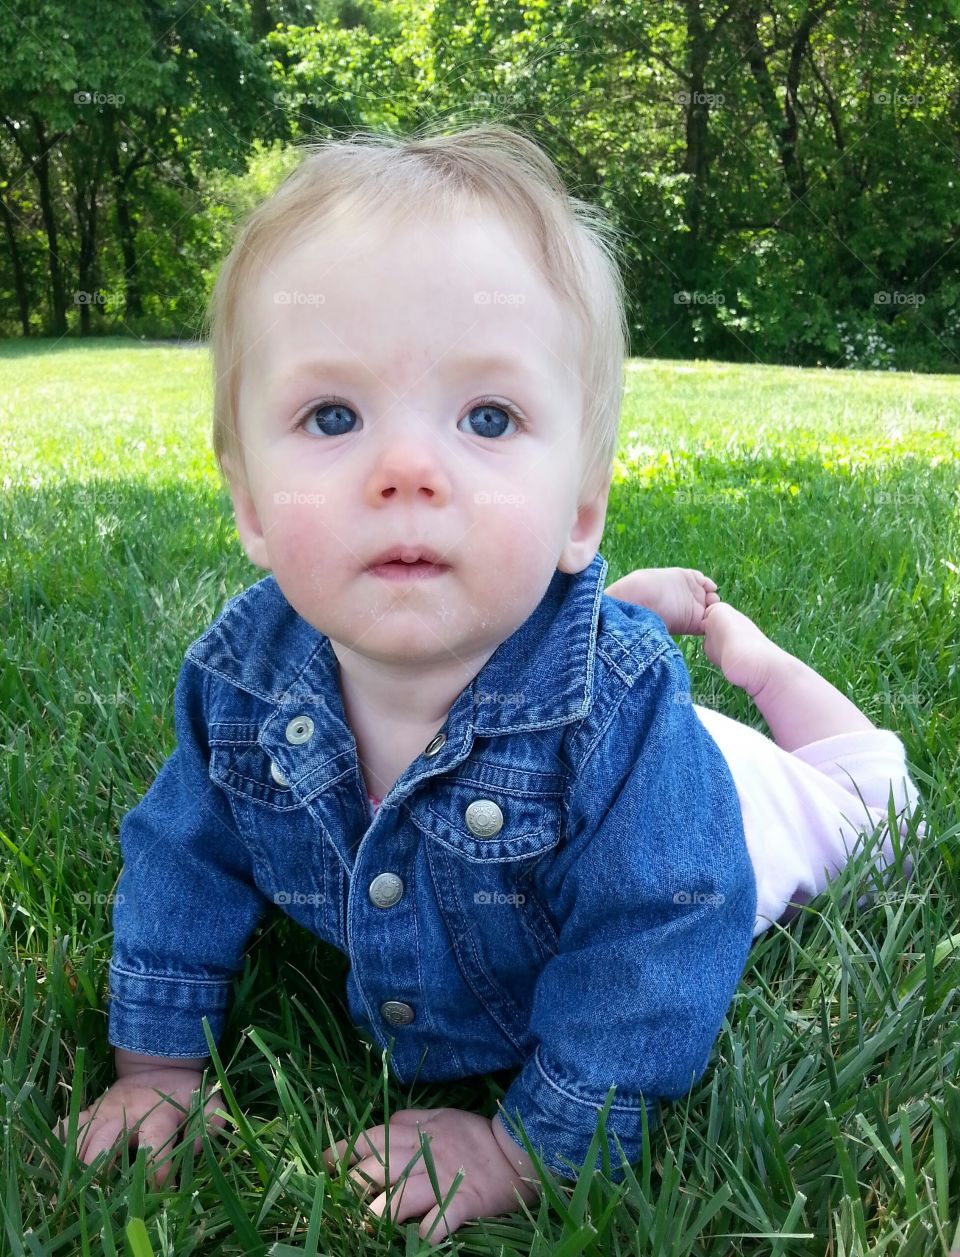 Piercing blue eyes of innocence surrounded by lush green grass